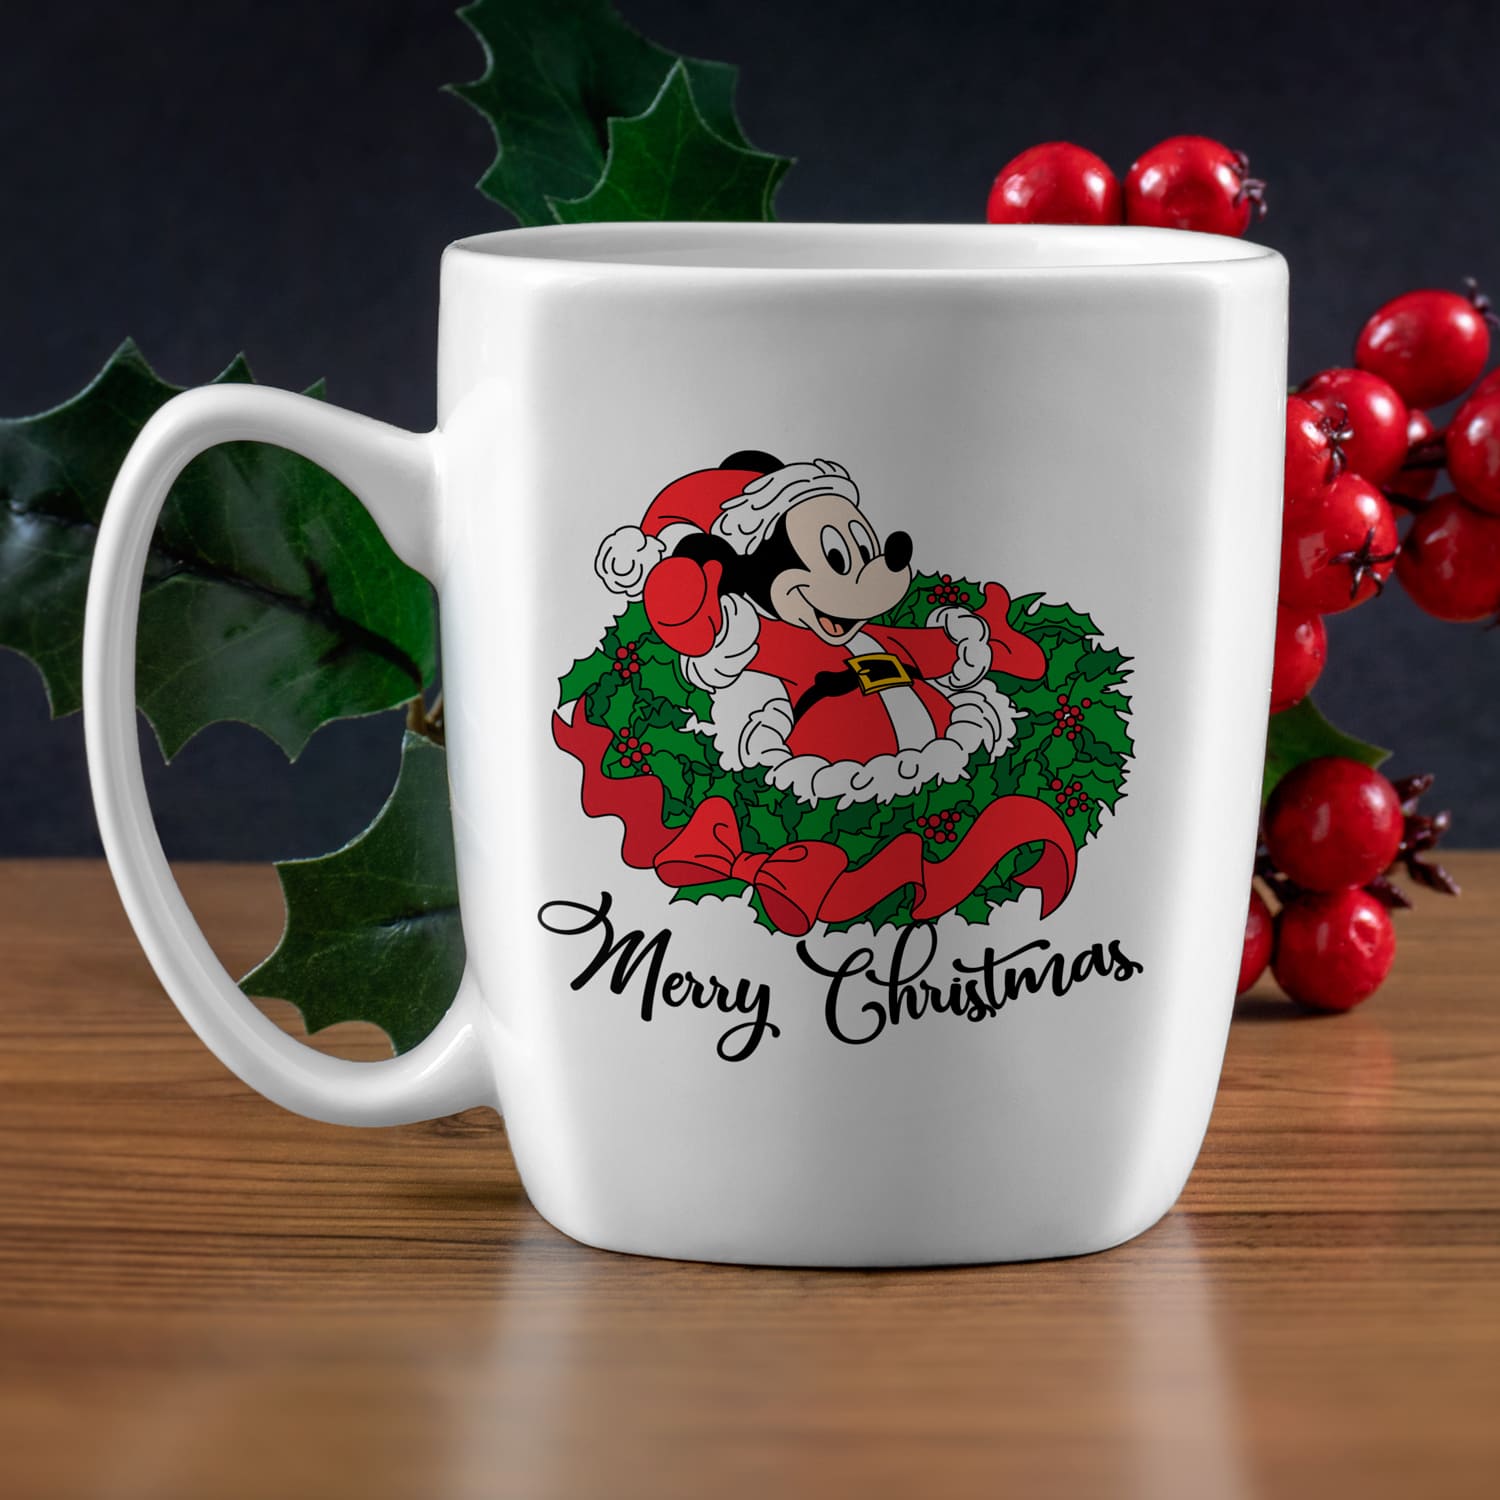 Themed cup Mickey Mouse Christmas design.